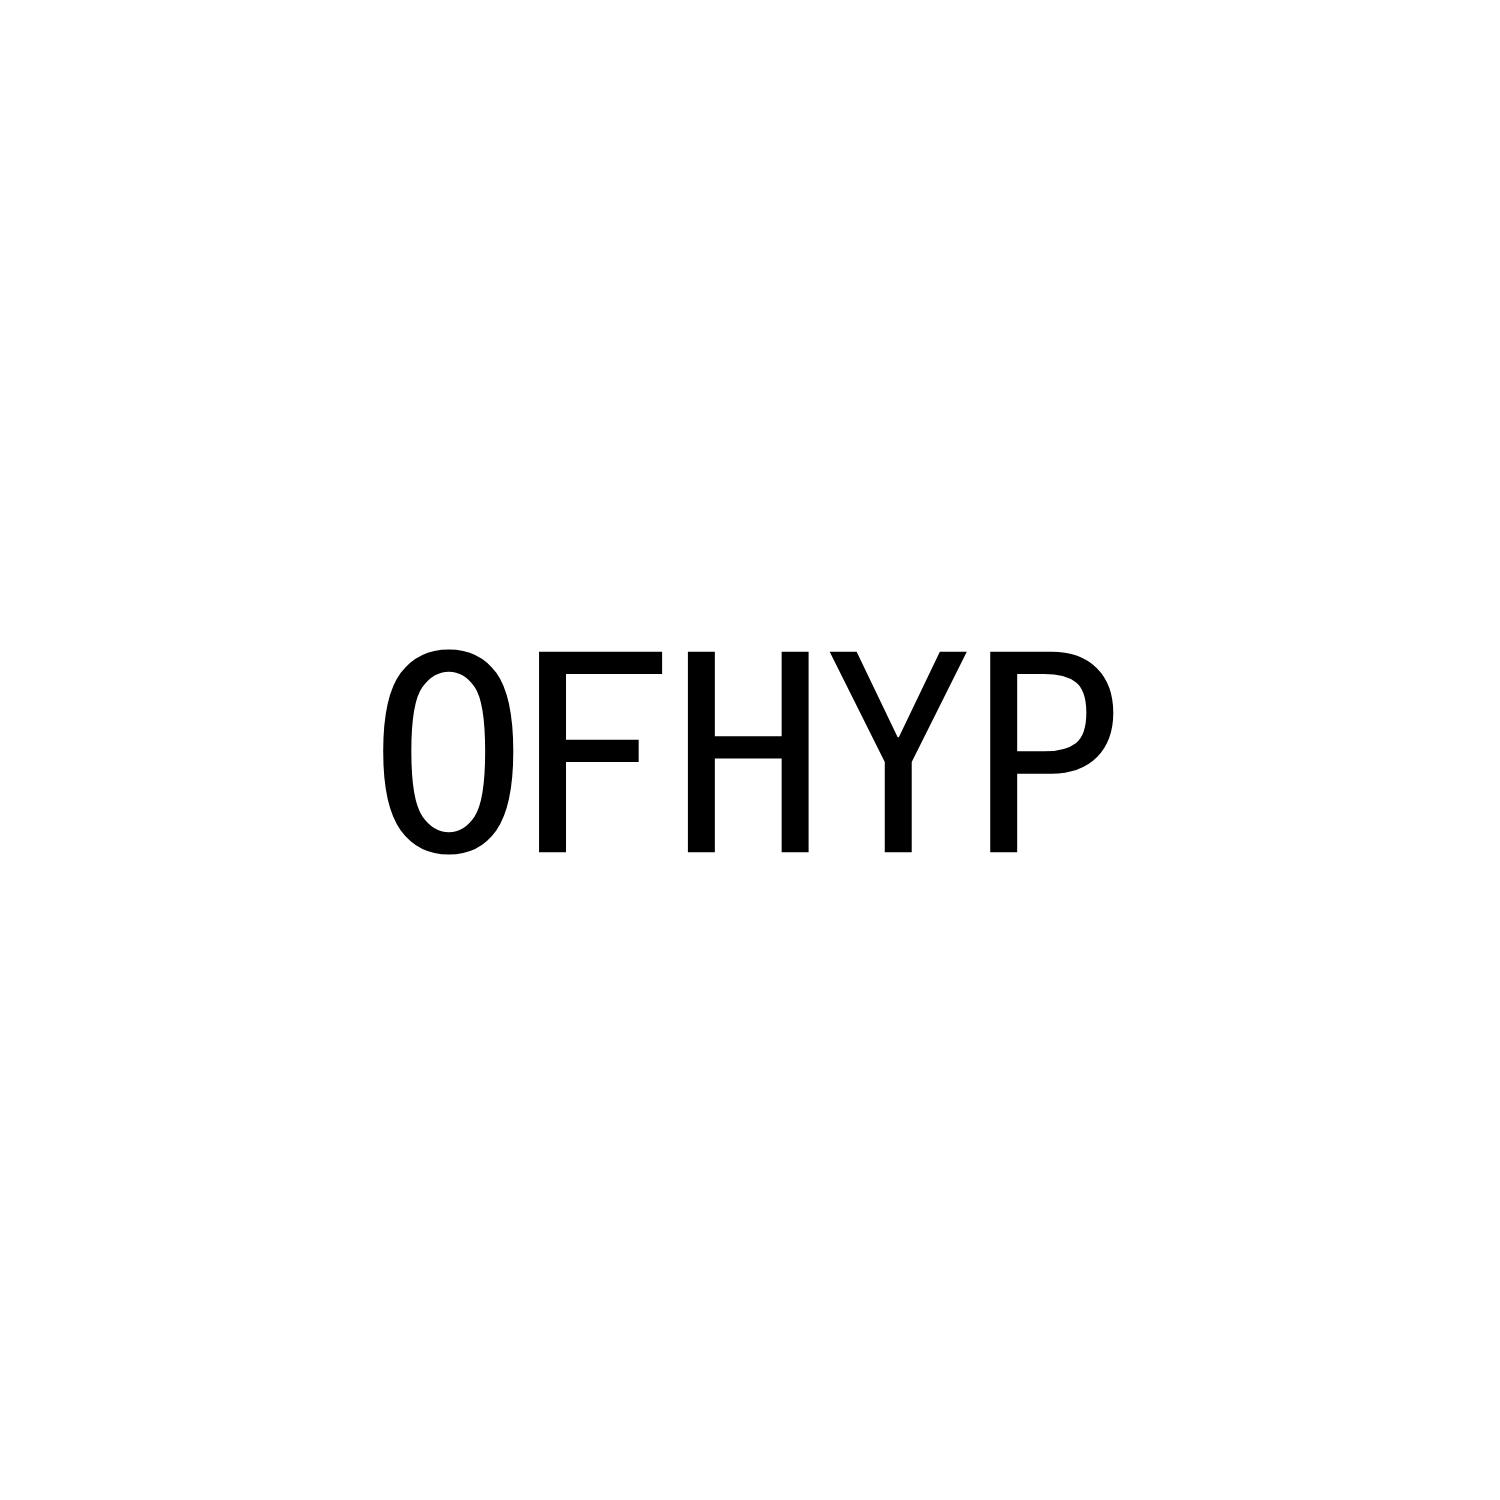 OFHYP